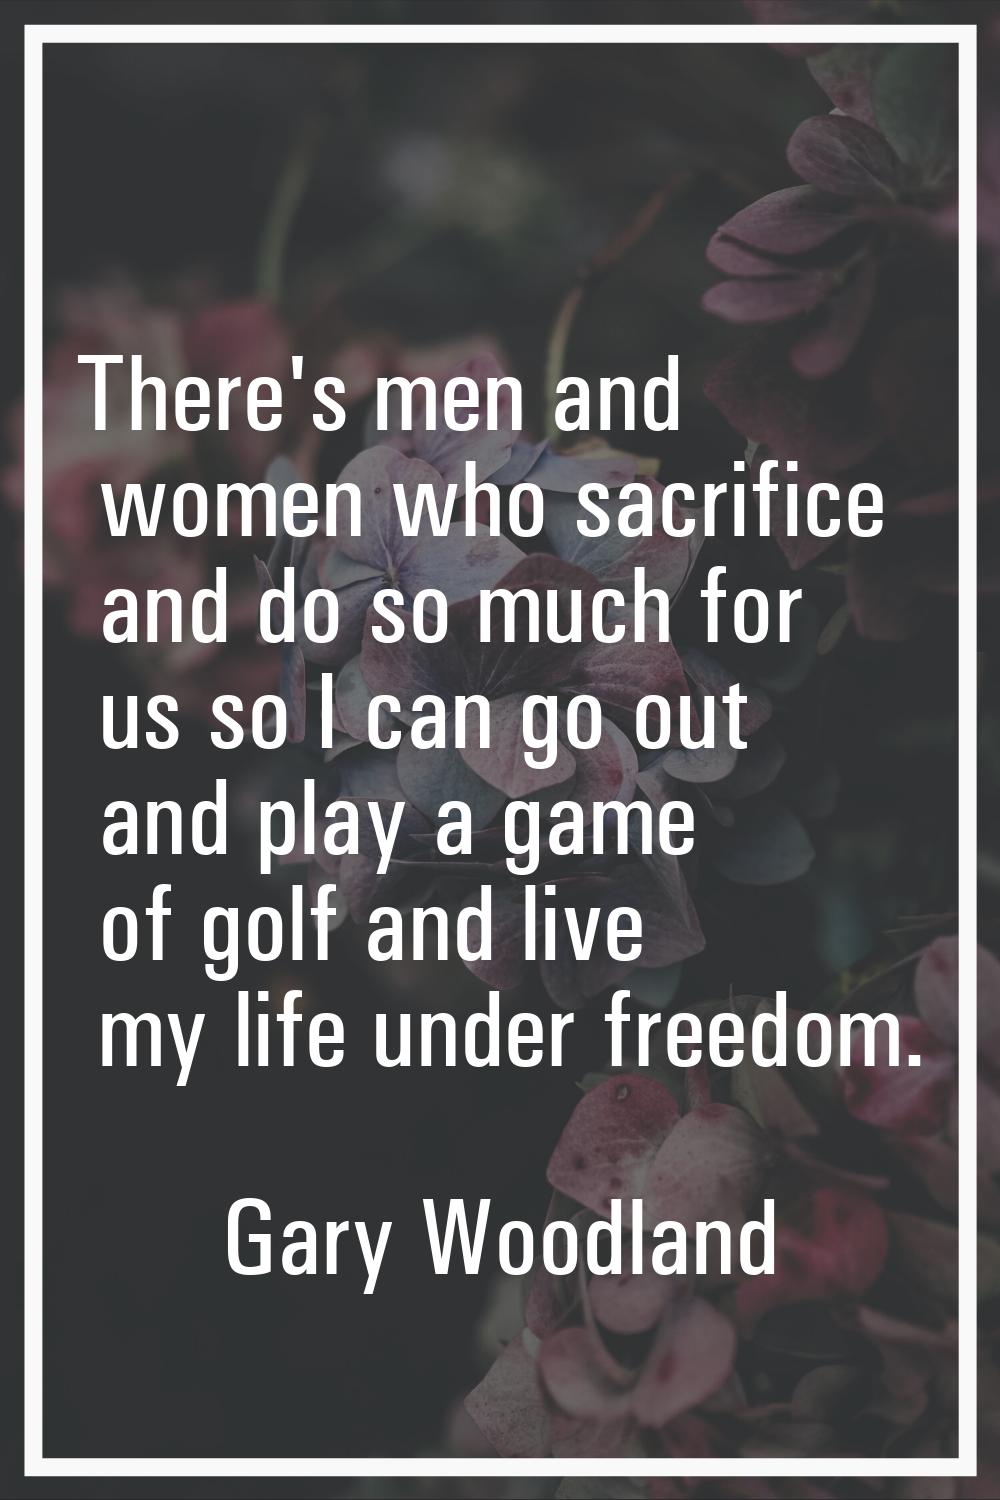 There's men and women who sacrifice and do so much for us so I can go out and play a game of golf a